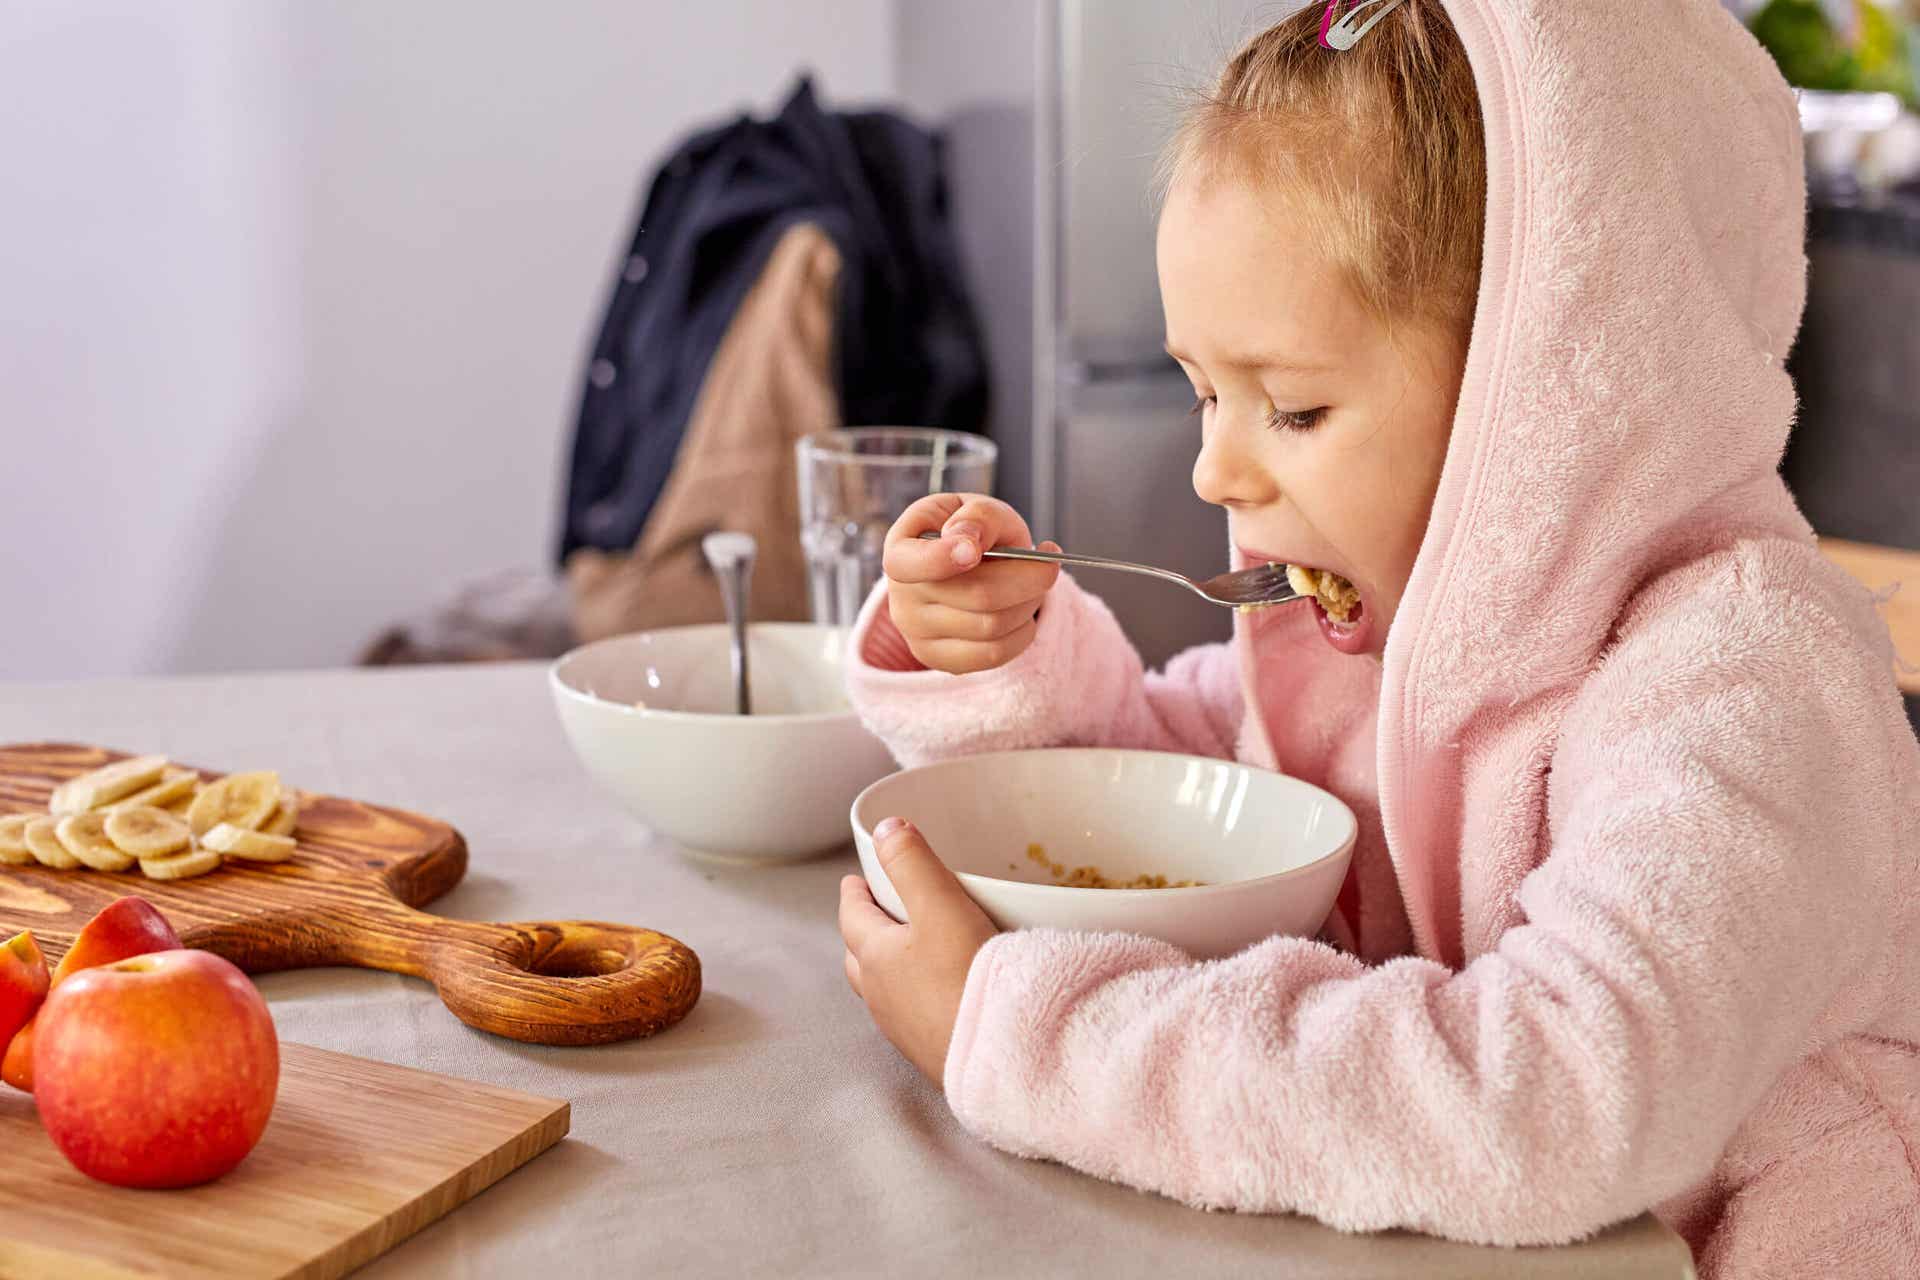 A young girl eating oatmeal at the table.